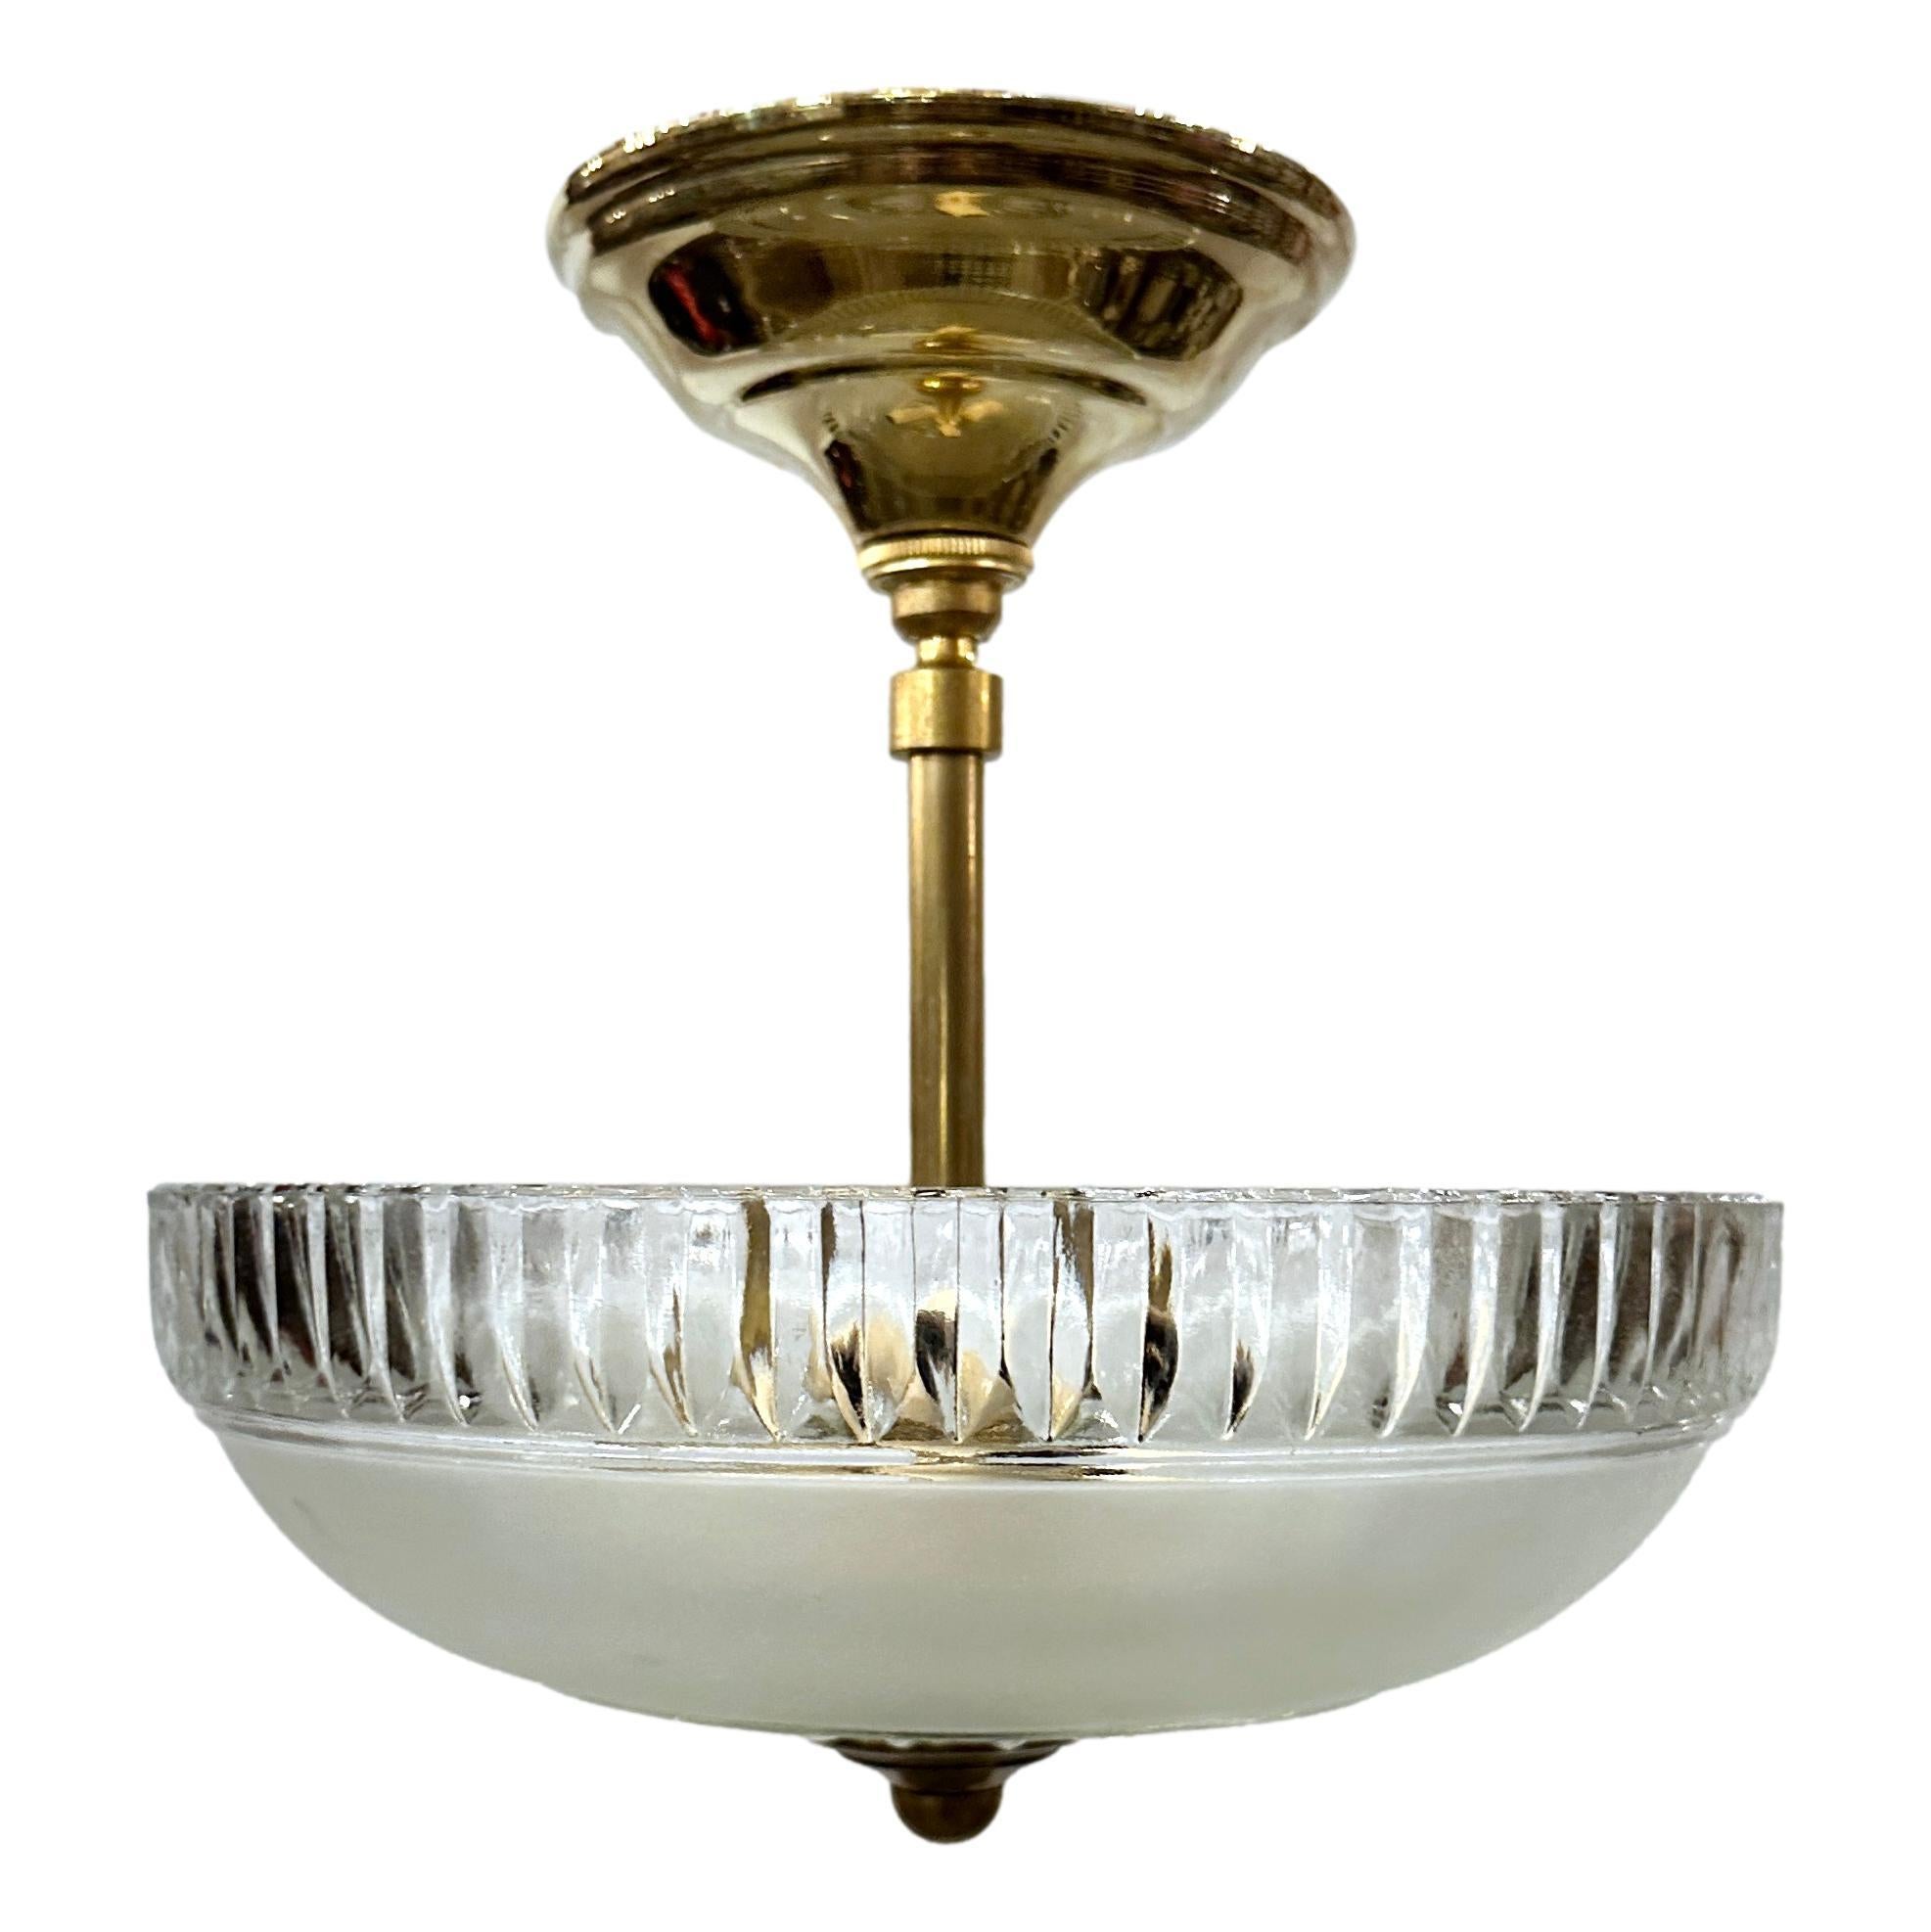 A circa 1920's French cut glass pendant light fixture with three lights.

Measurements:
Drop: 10